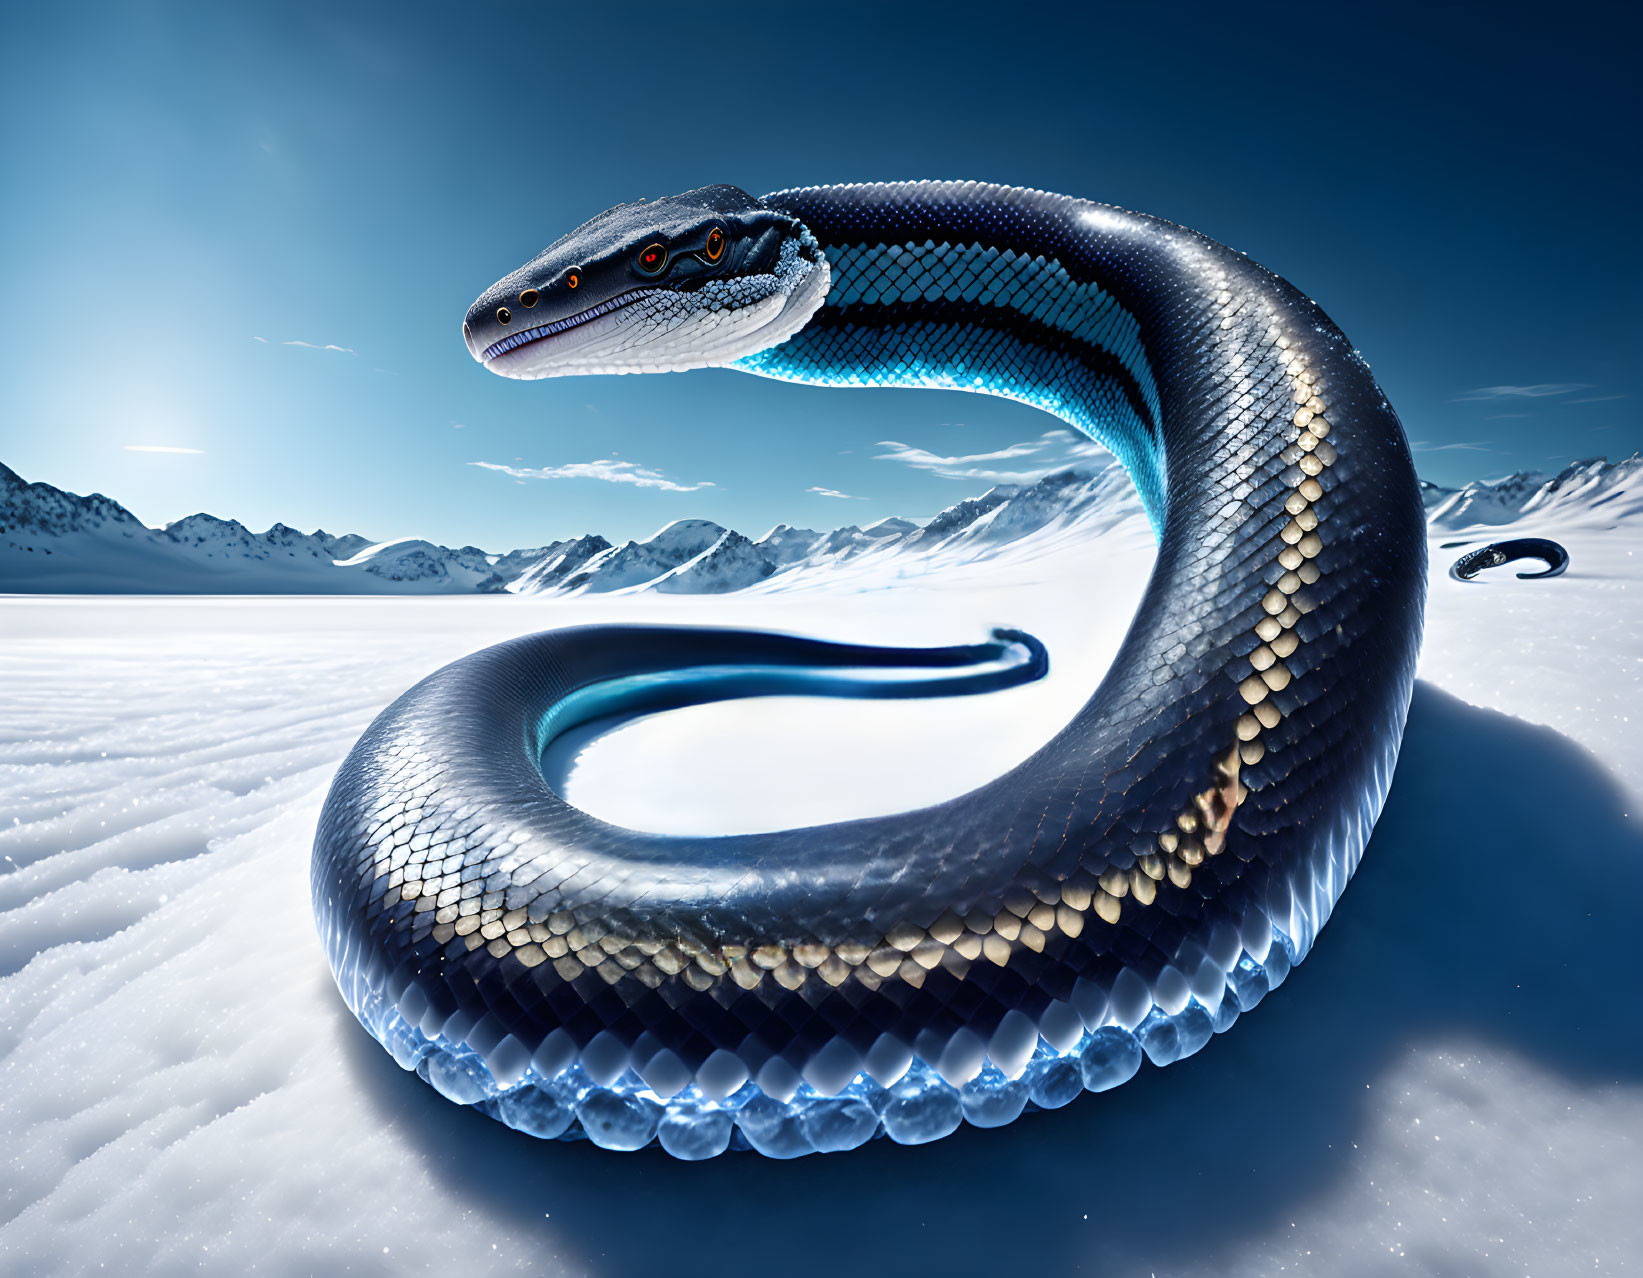 Realistic CGI snake with dark blue and gold colors on snowy landscape